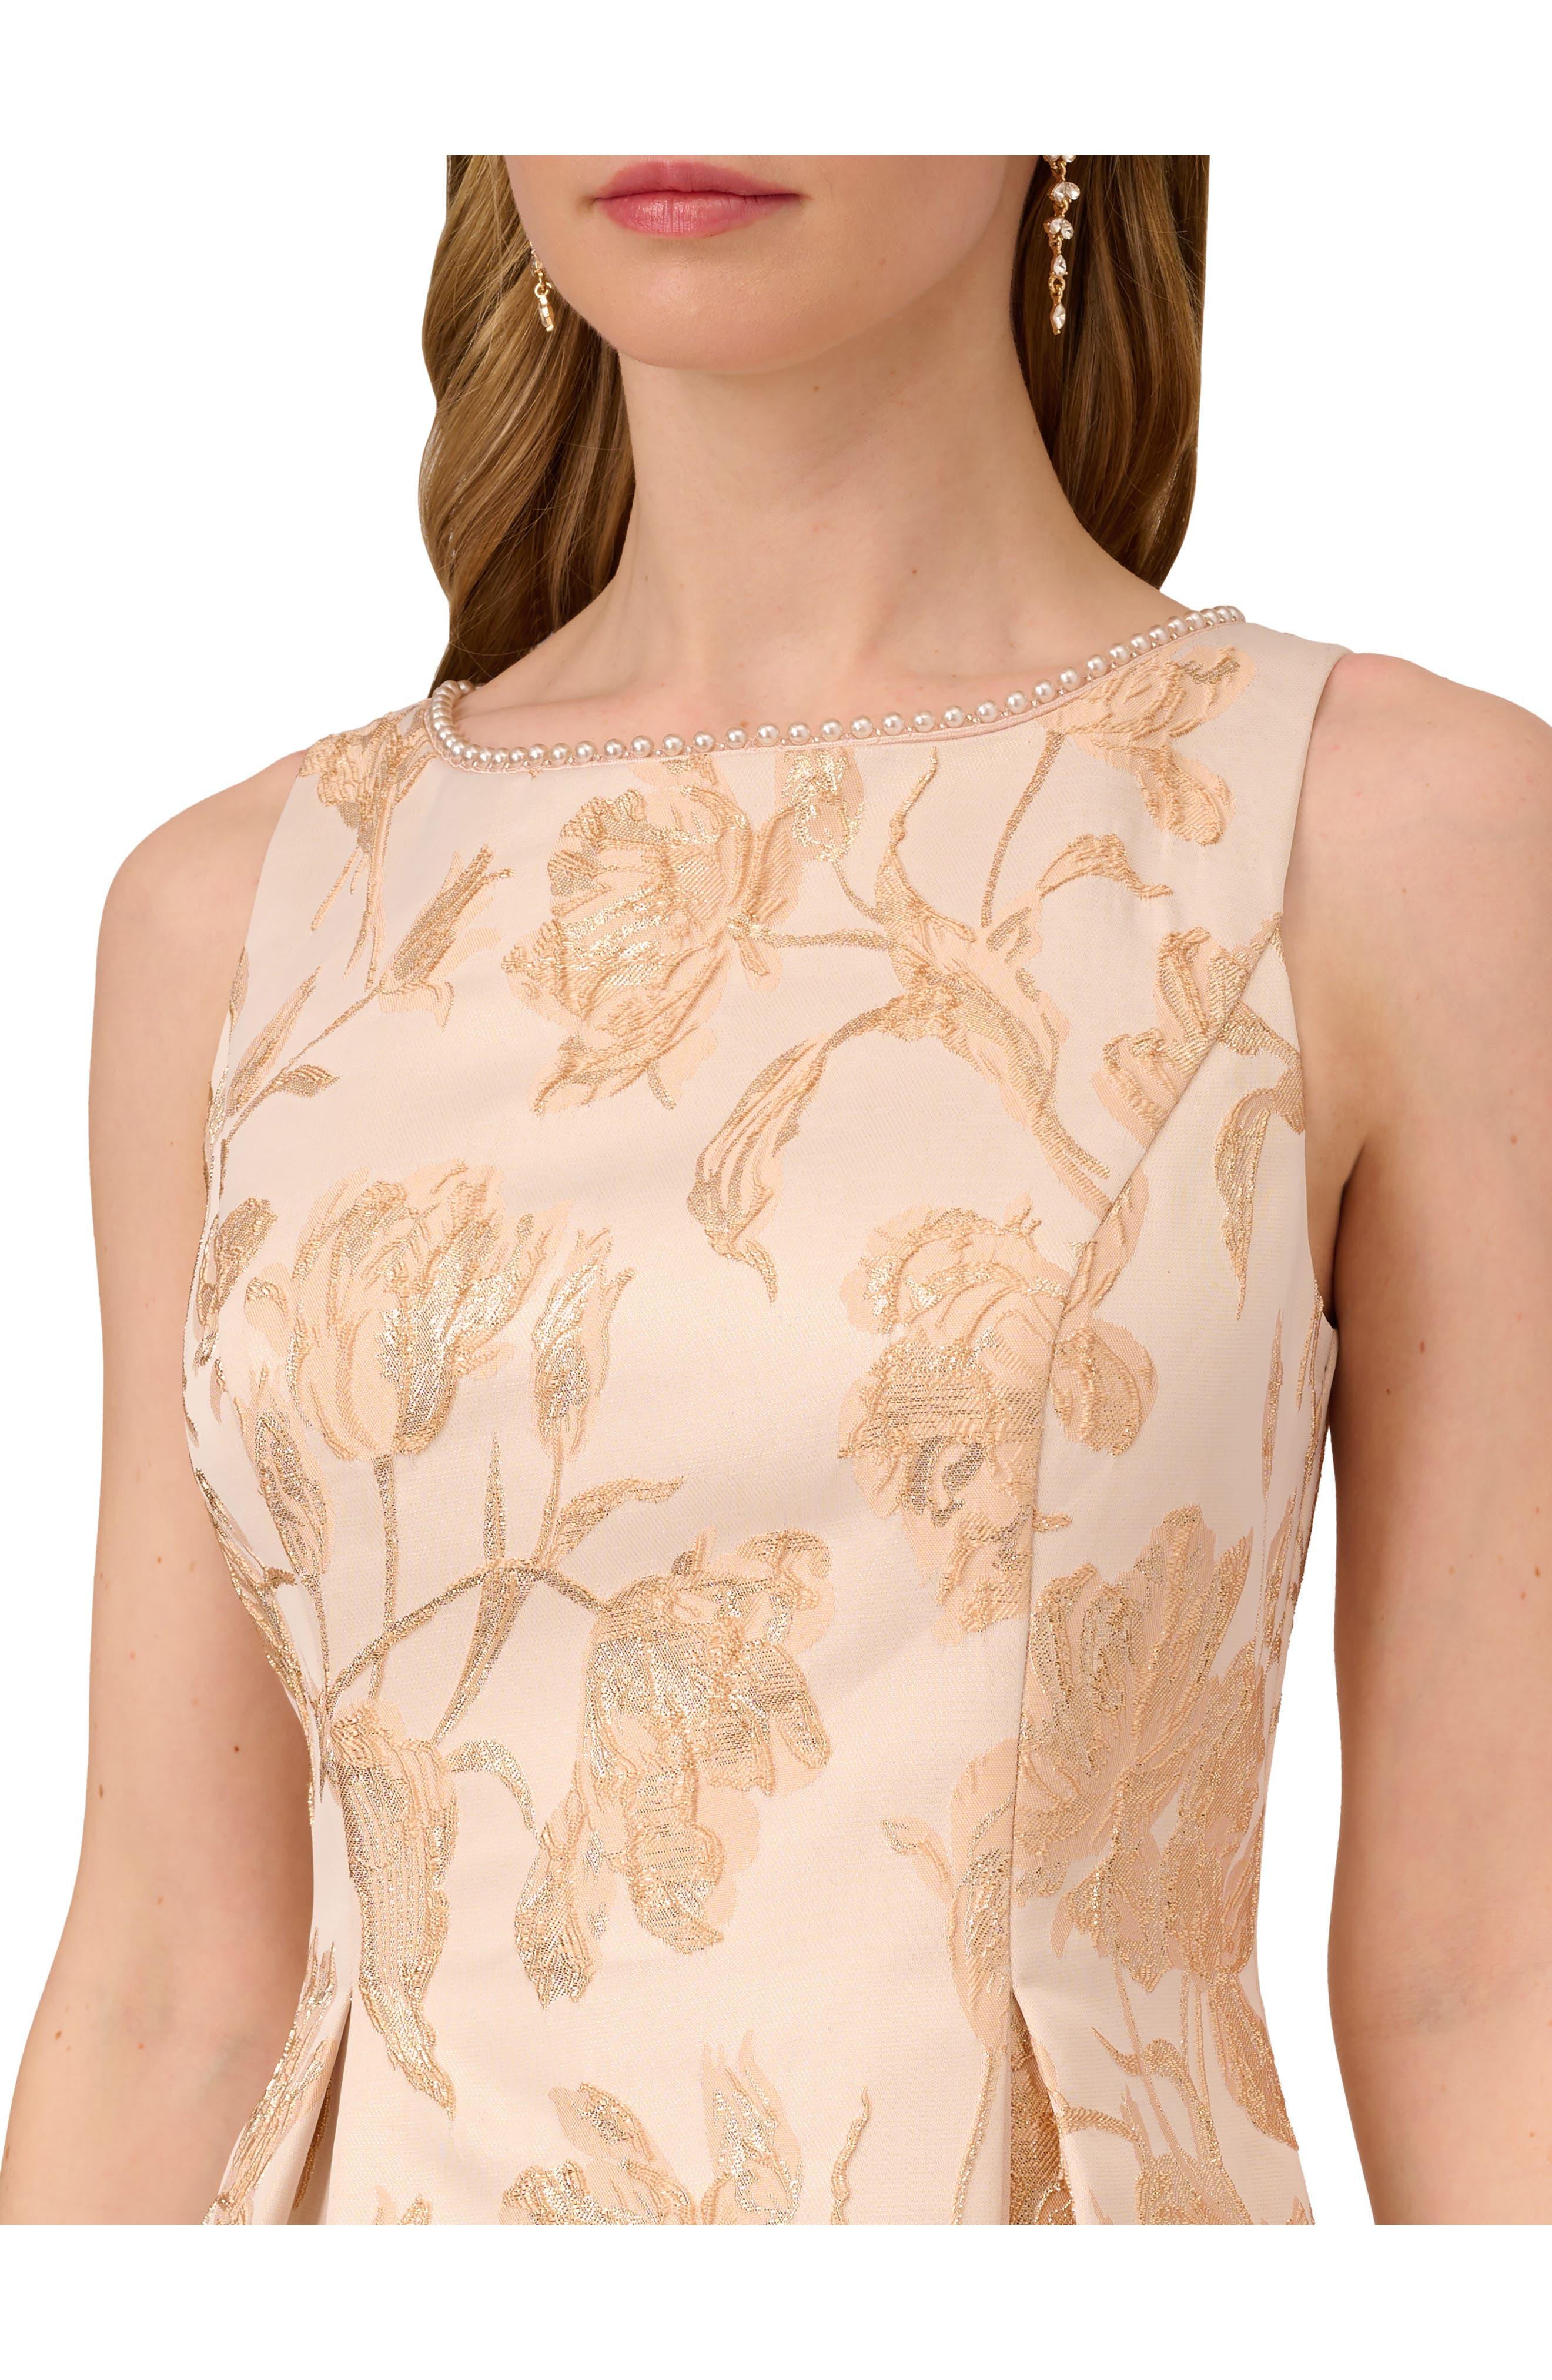 Adrianna Papell Metallic Bead Jacquard High-low Fit & Flare Dress in  Natural | Lyst